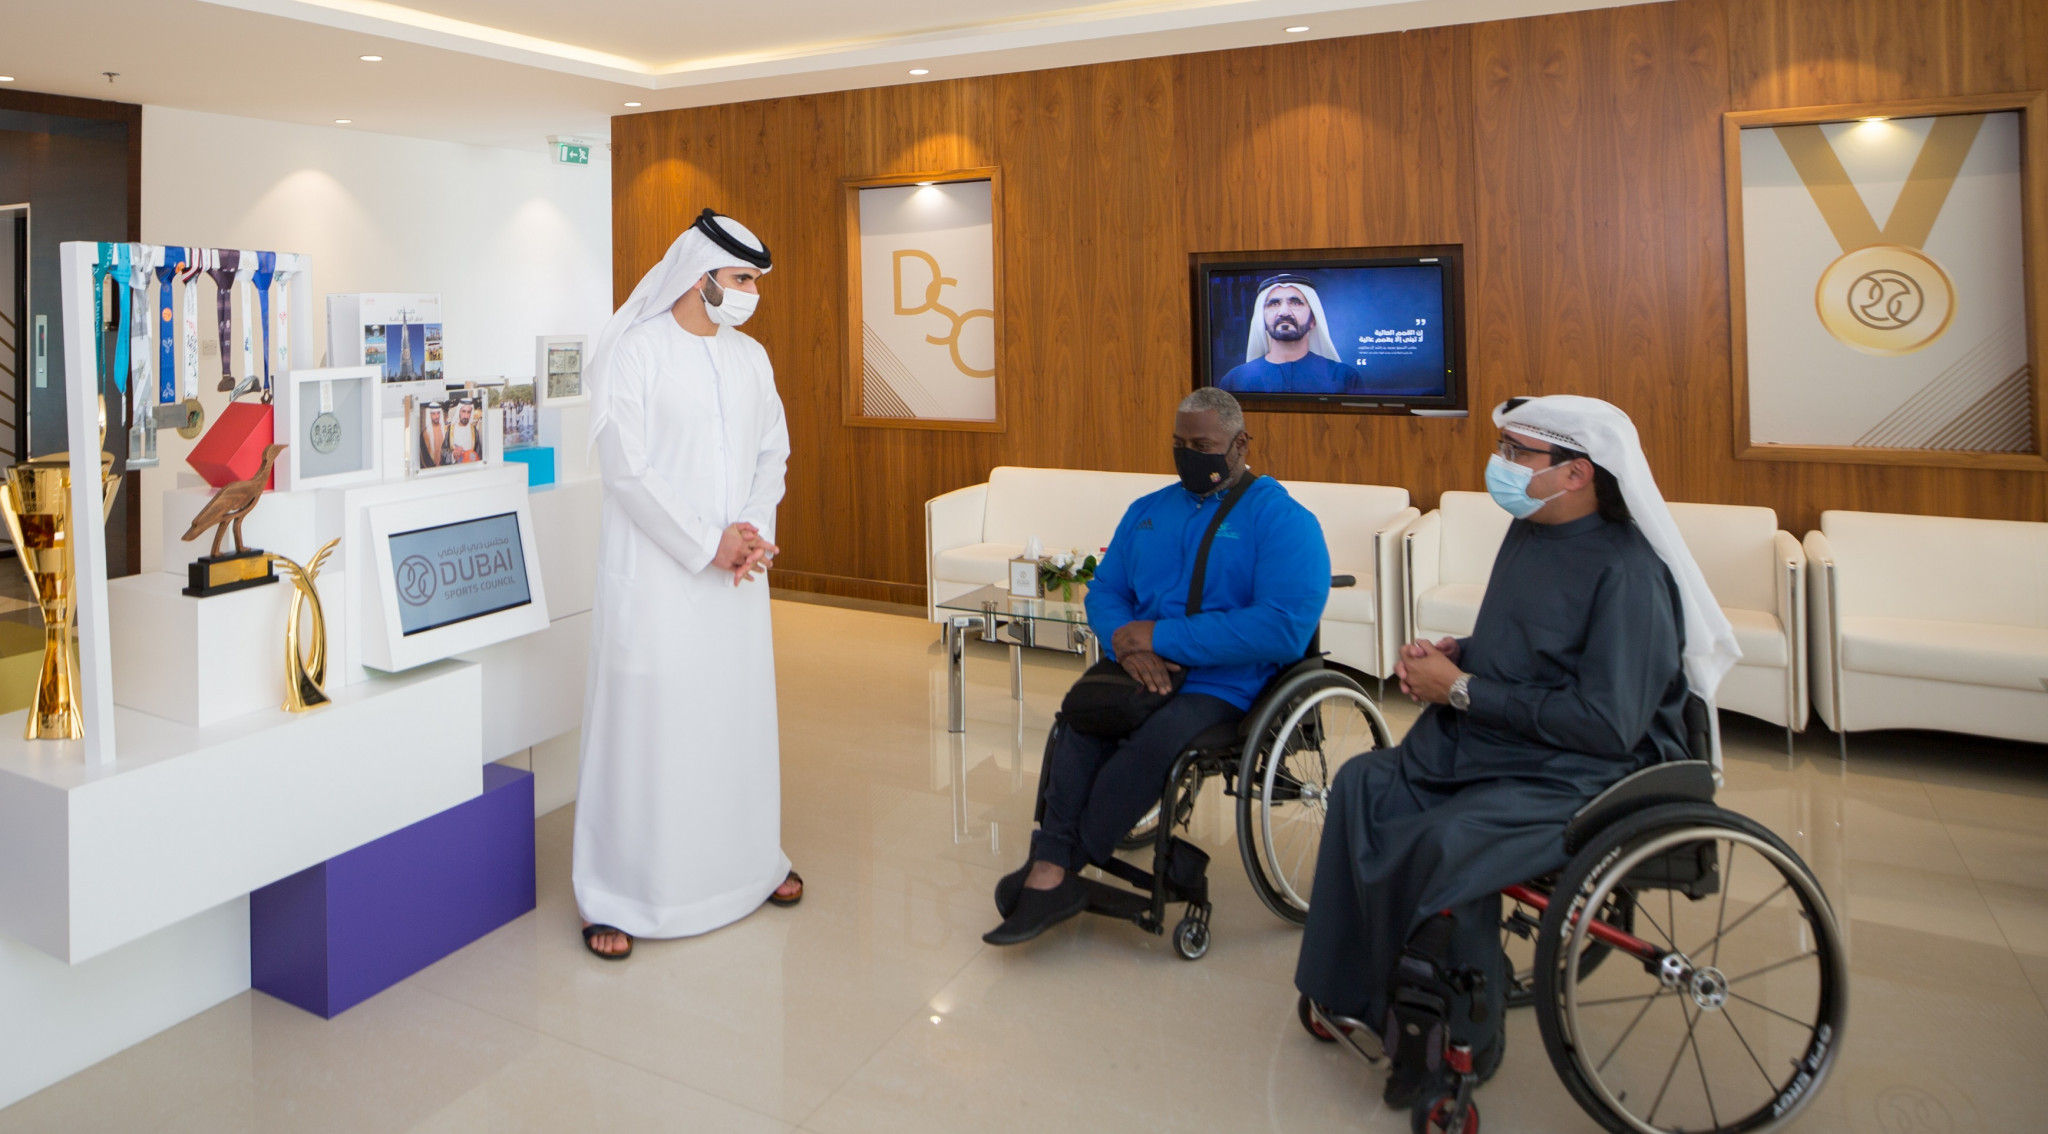 Mohammed Khamis, centre, met with Sheikh Mansoor, left, to discuss success in sport ©Dubai Sports Council